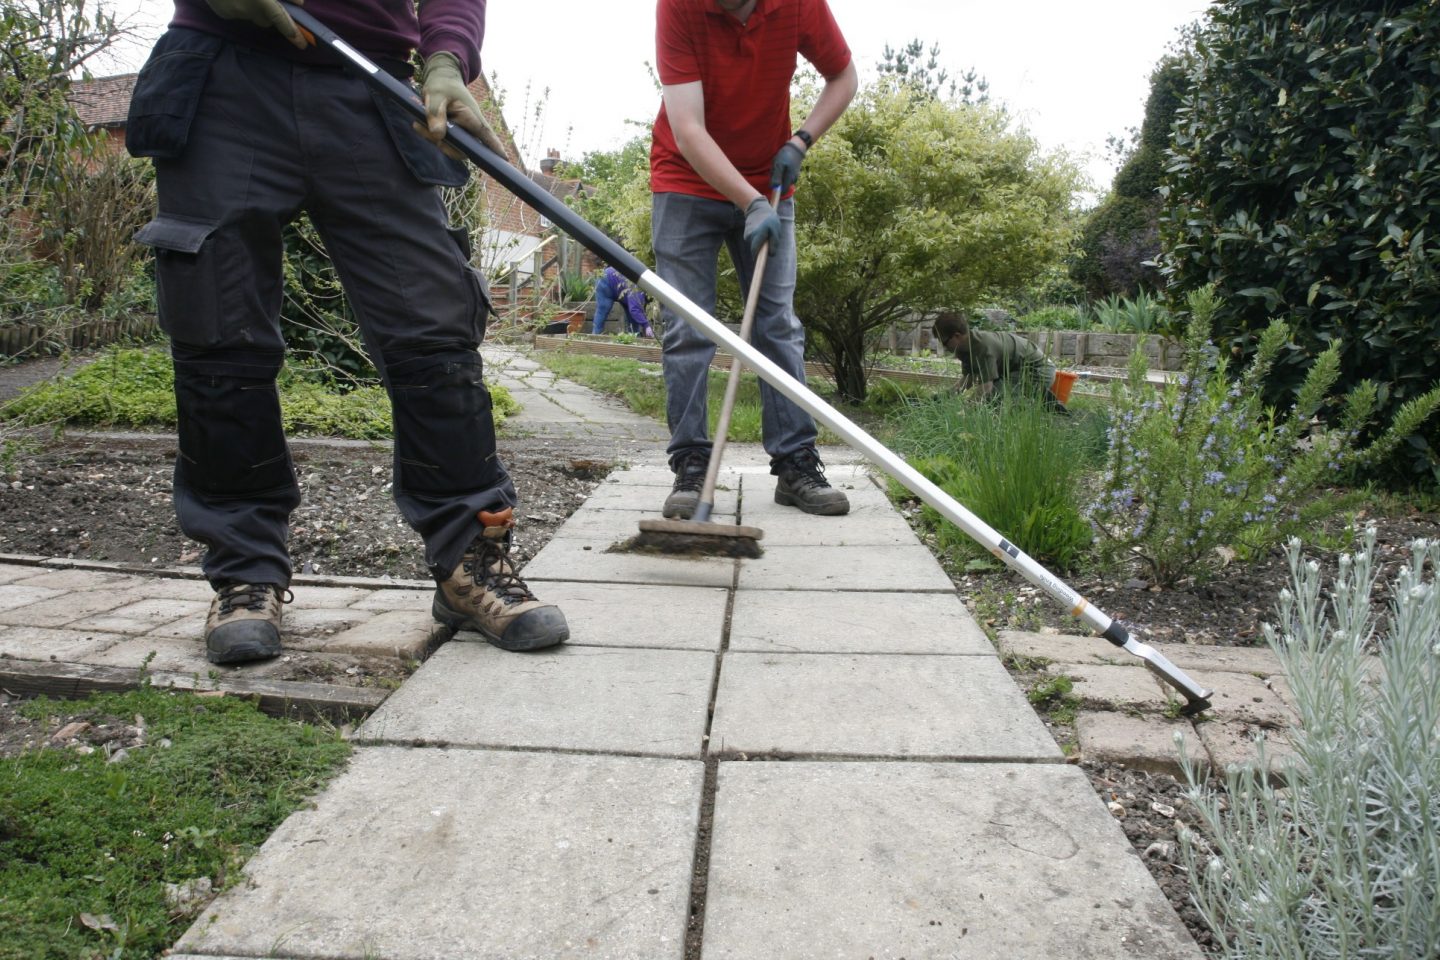 Weeding pavers with a long handled weeding knife